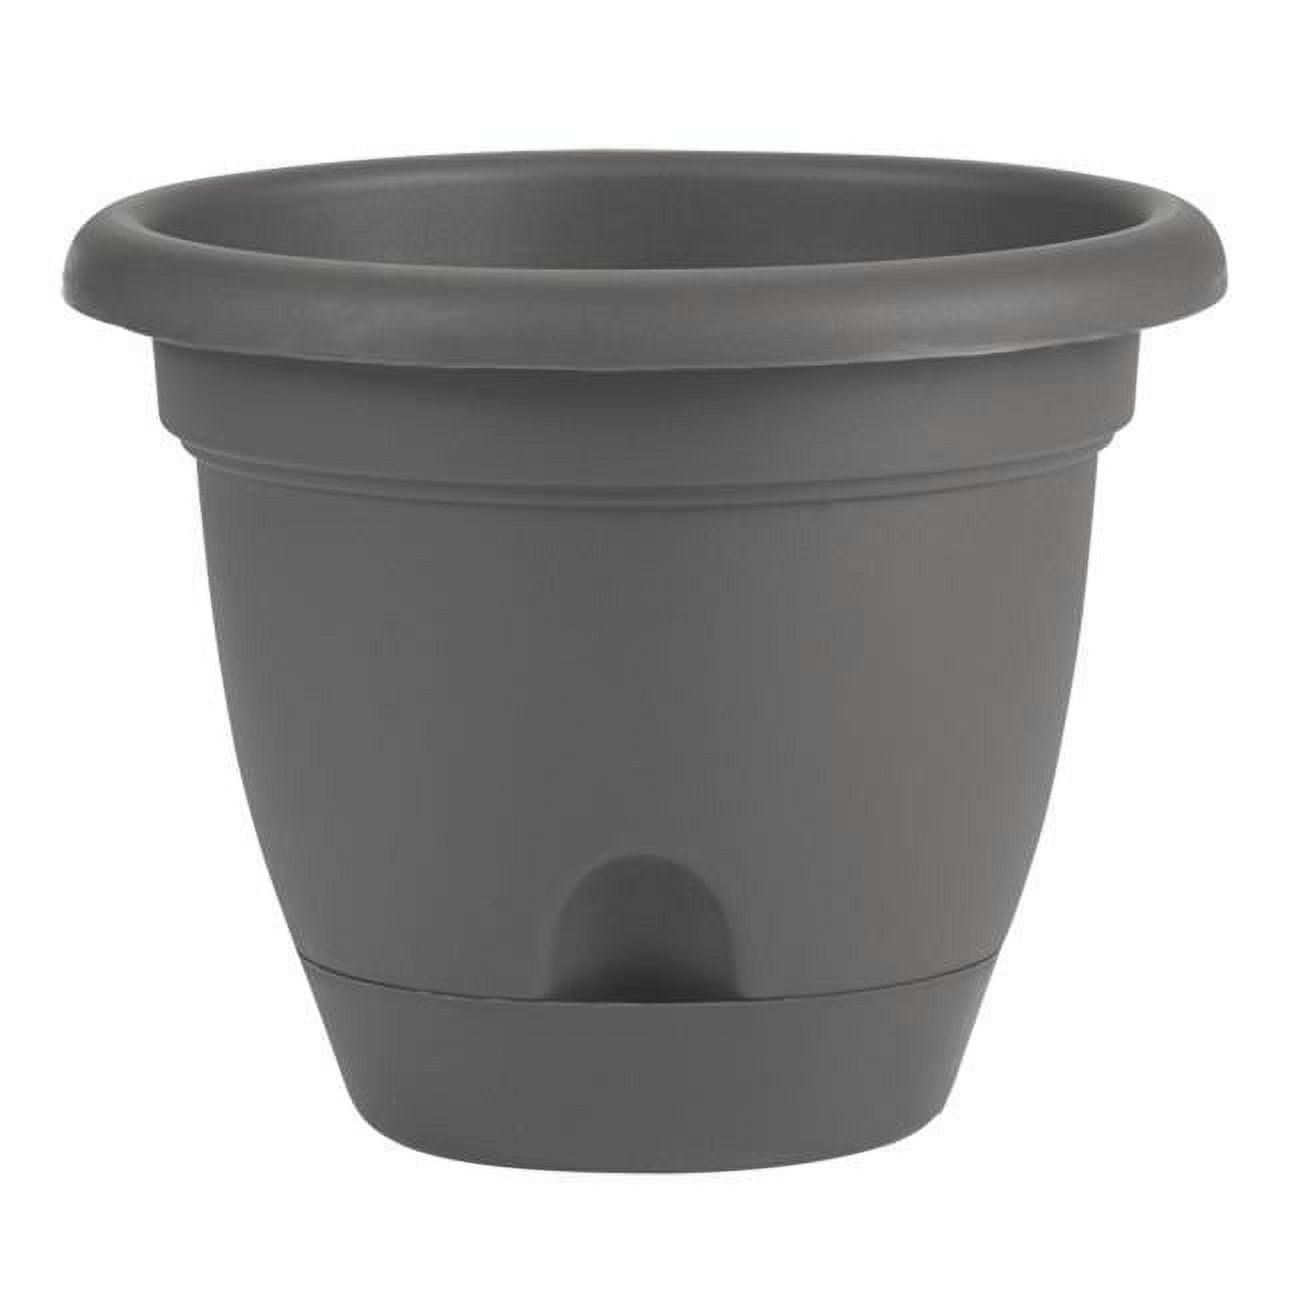 Charcoal Gray 12" Self-Watering Resin Planter with Saucer